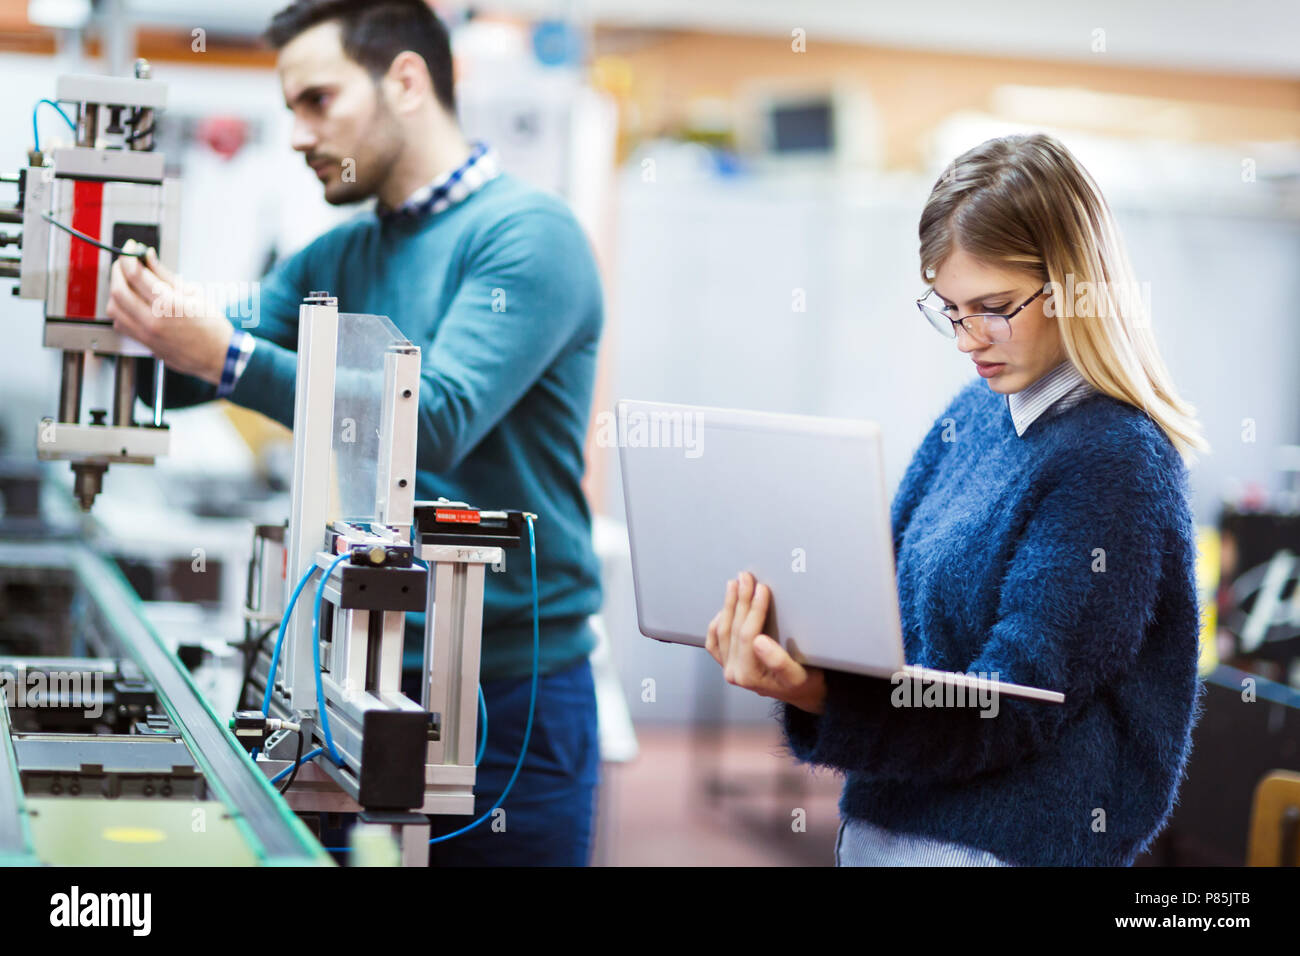 Young students of electronics working on project Stock Photo